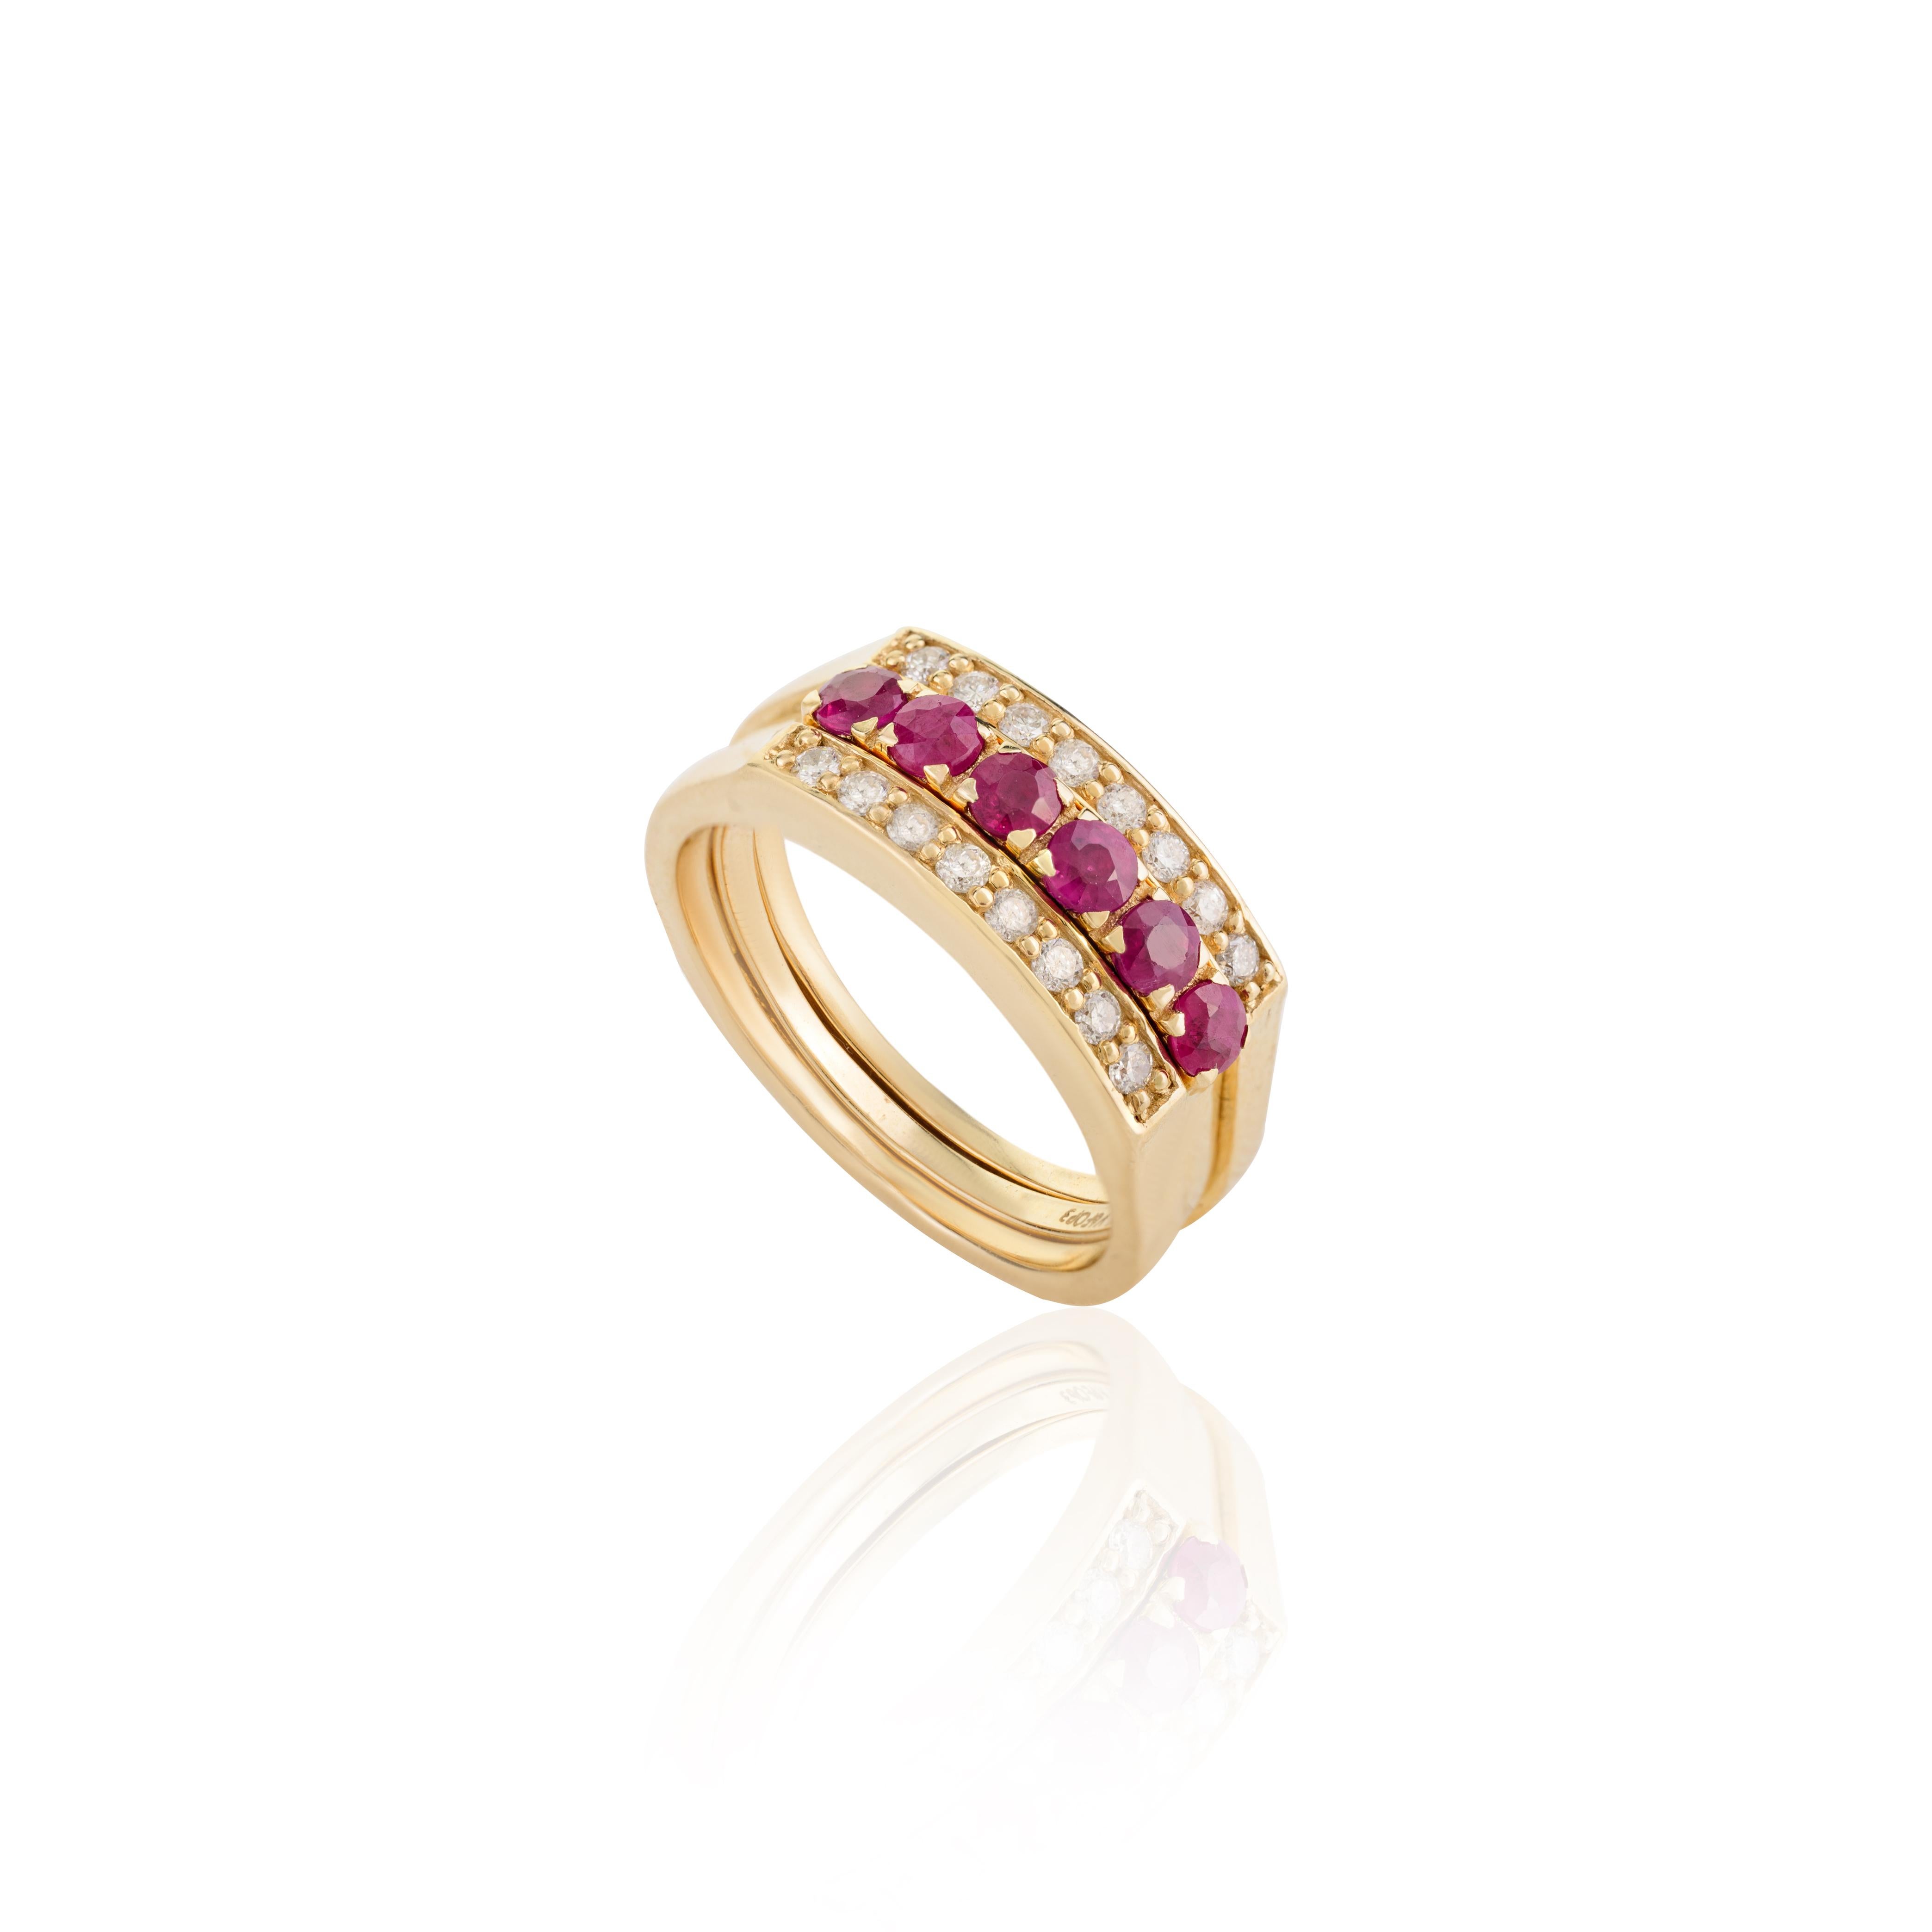 For Sale:  Unisex Two-in-One 14k Solid Yellow Gold Natural Ruby and Diamond Wedding Ring 5